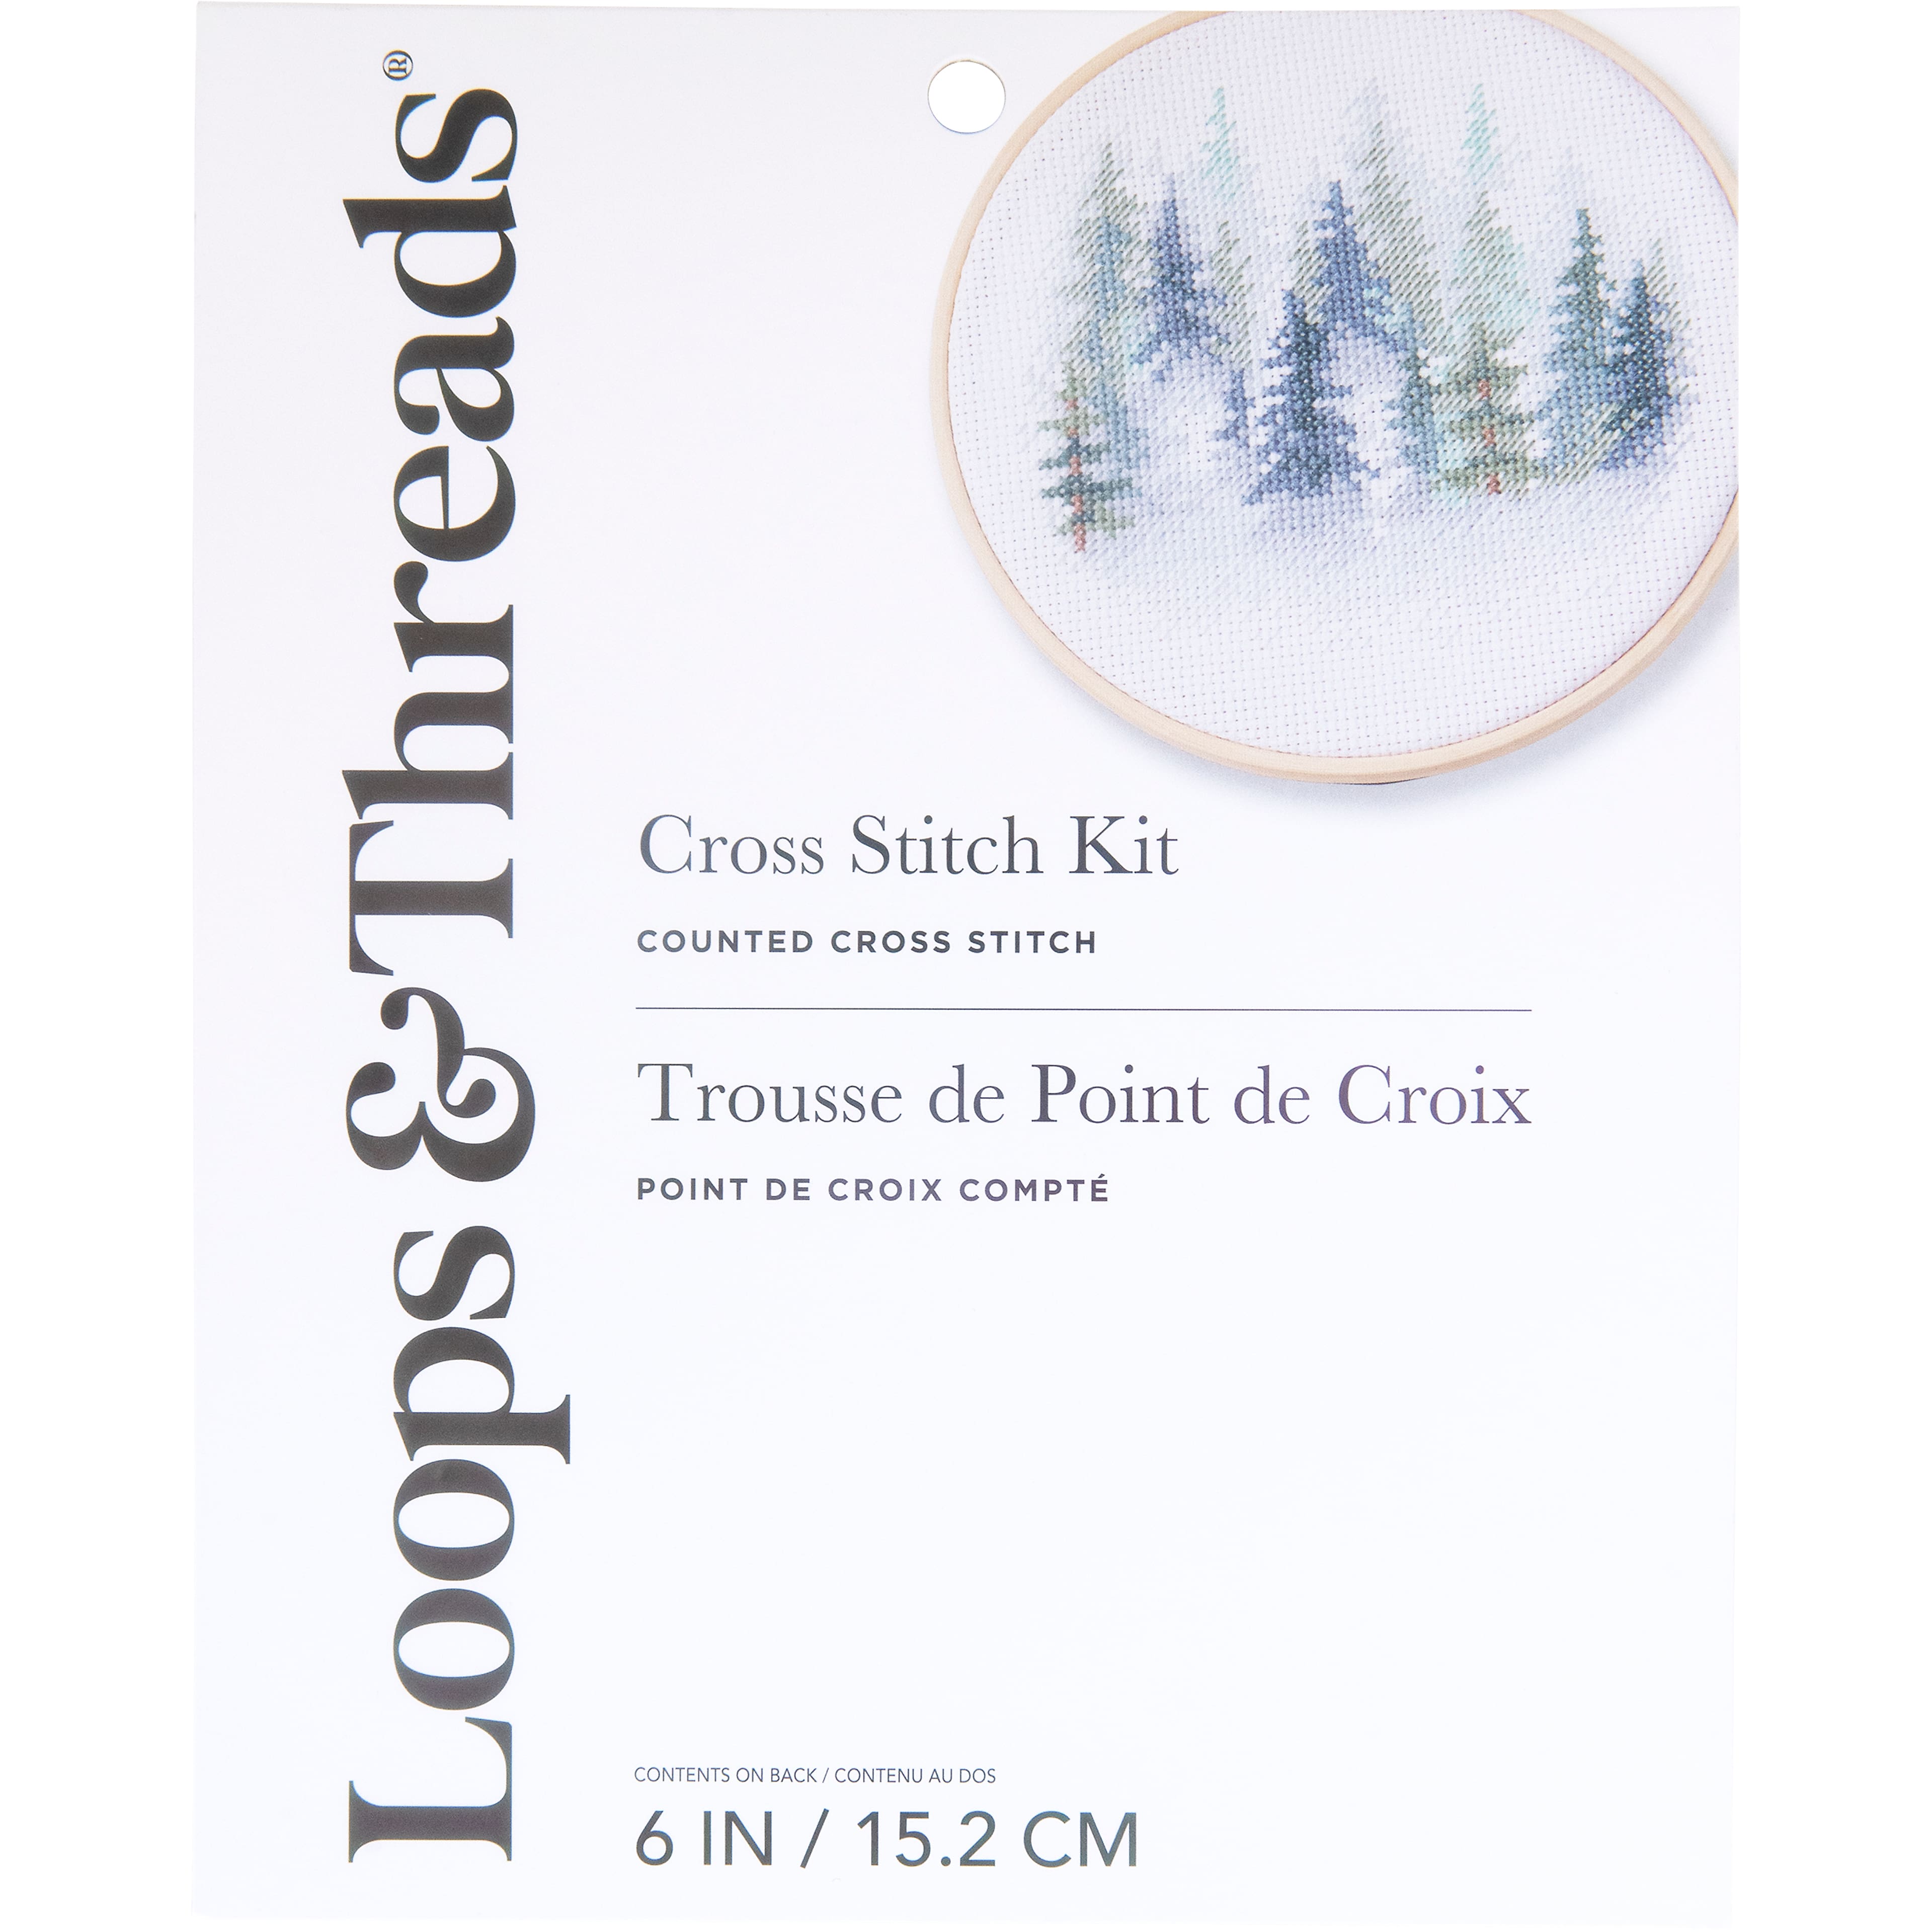 Trees Counted Cross Stitch Kit by Loops & Threads®